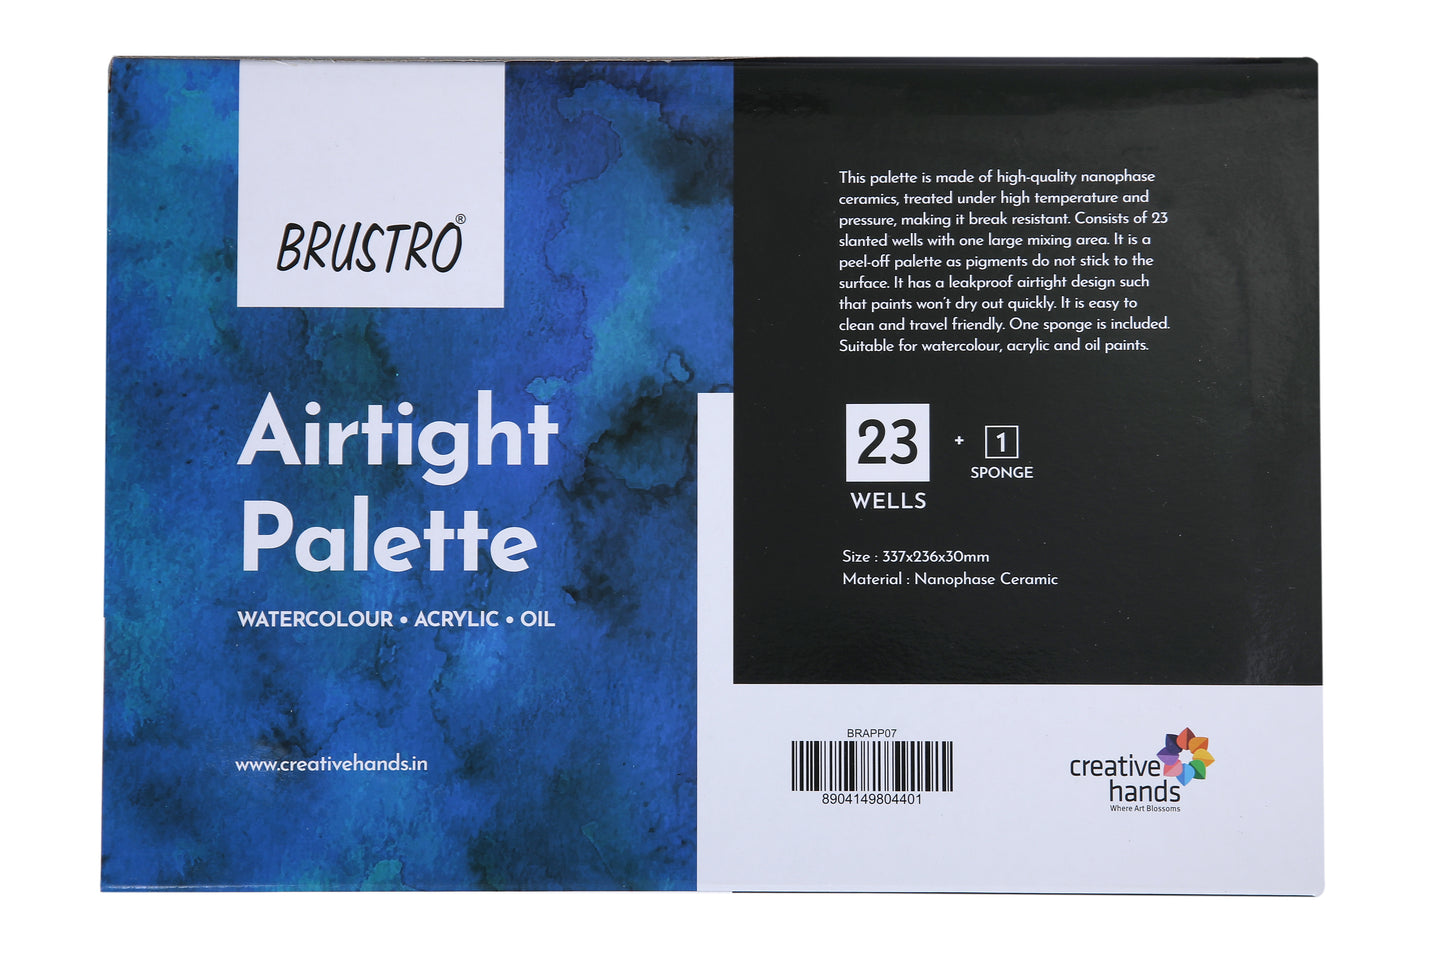 BRUSTRO Artists’ AIRTIGHT Peel-off Palette 23 Wells with Separable Lid made of Nanophase Ceramic (sponge included)